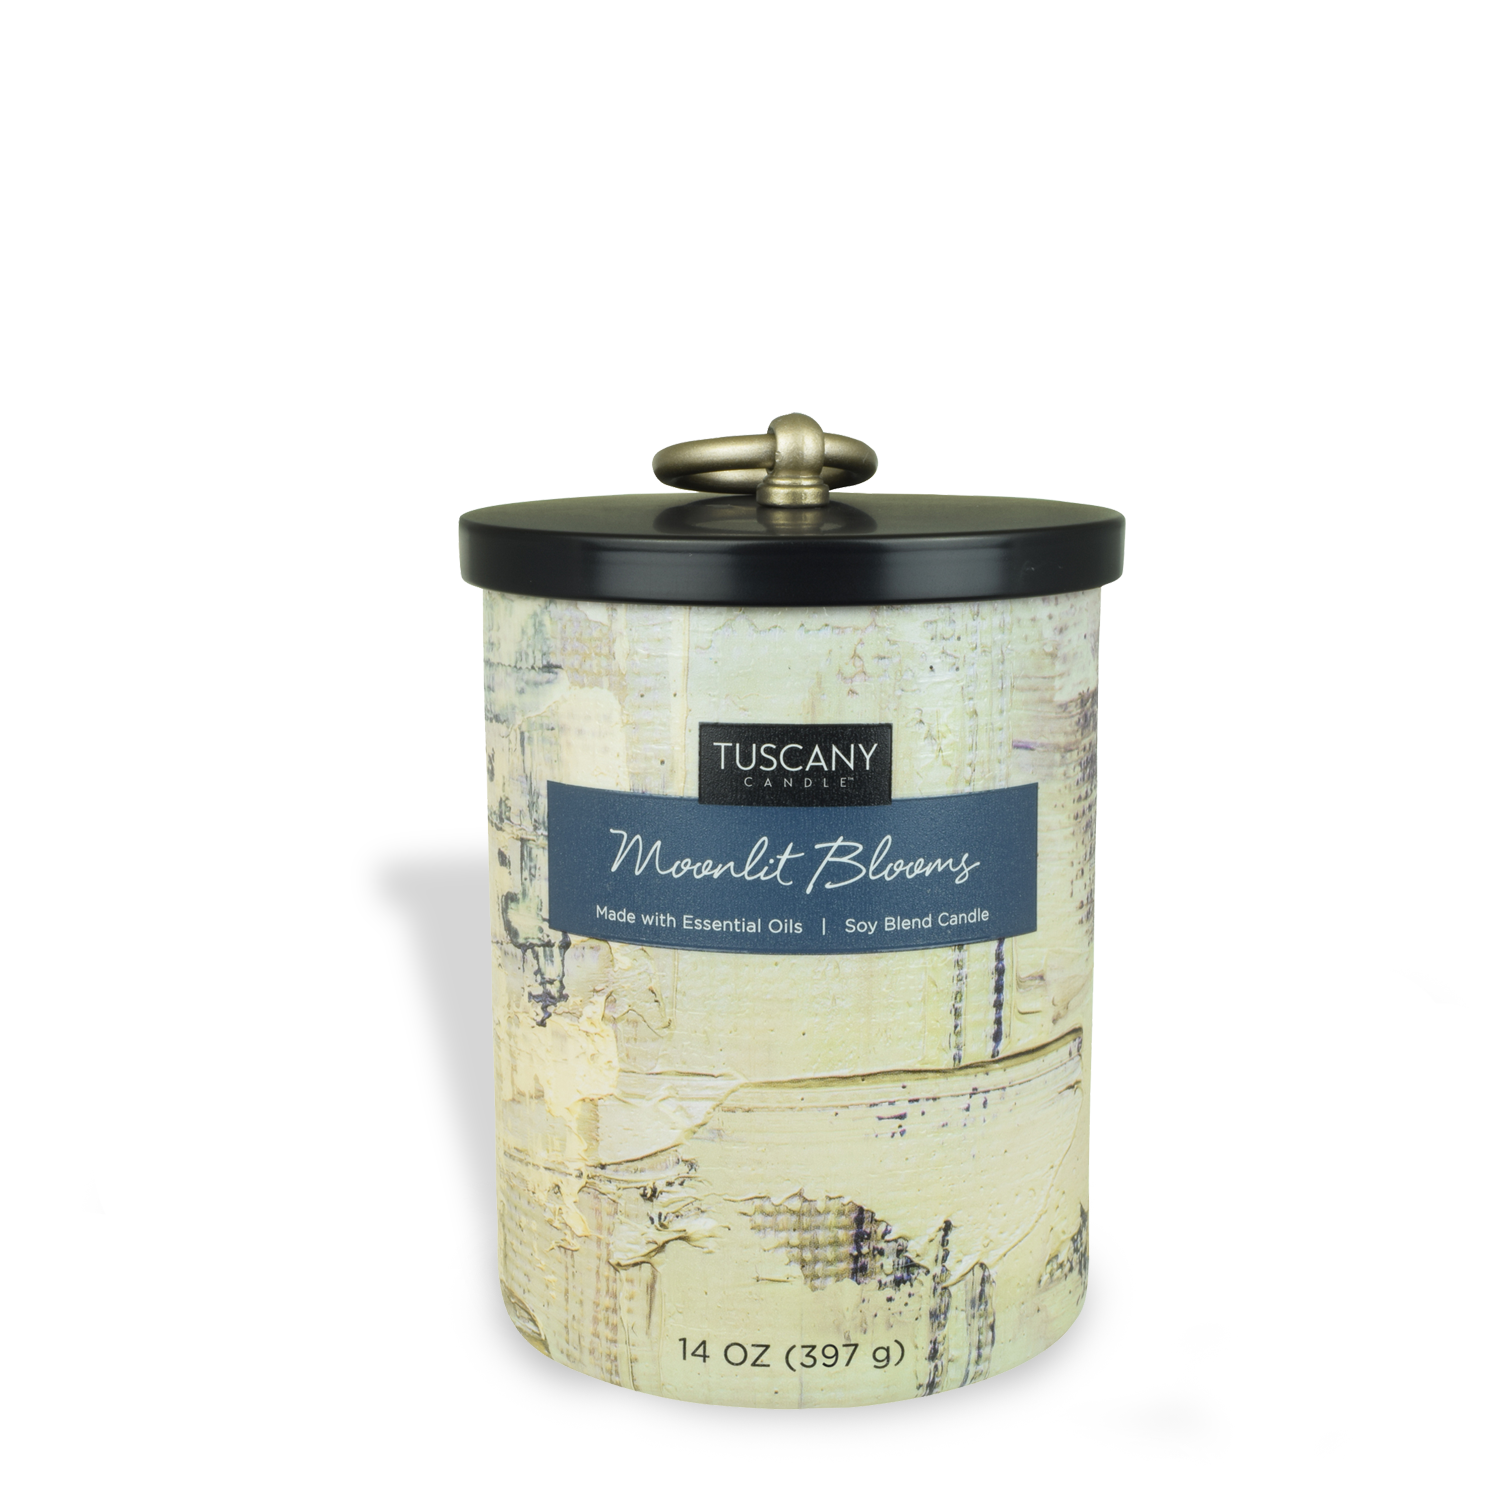 A Moonlit Blooms scented candle in a tin container with a black lid by Tuscany Candle® EVD.